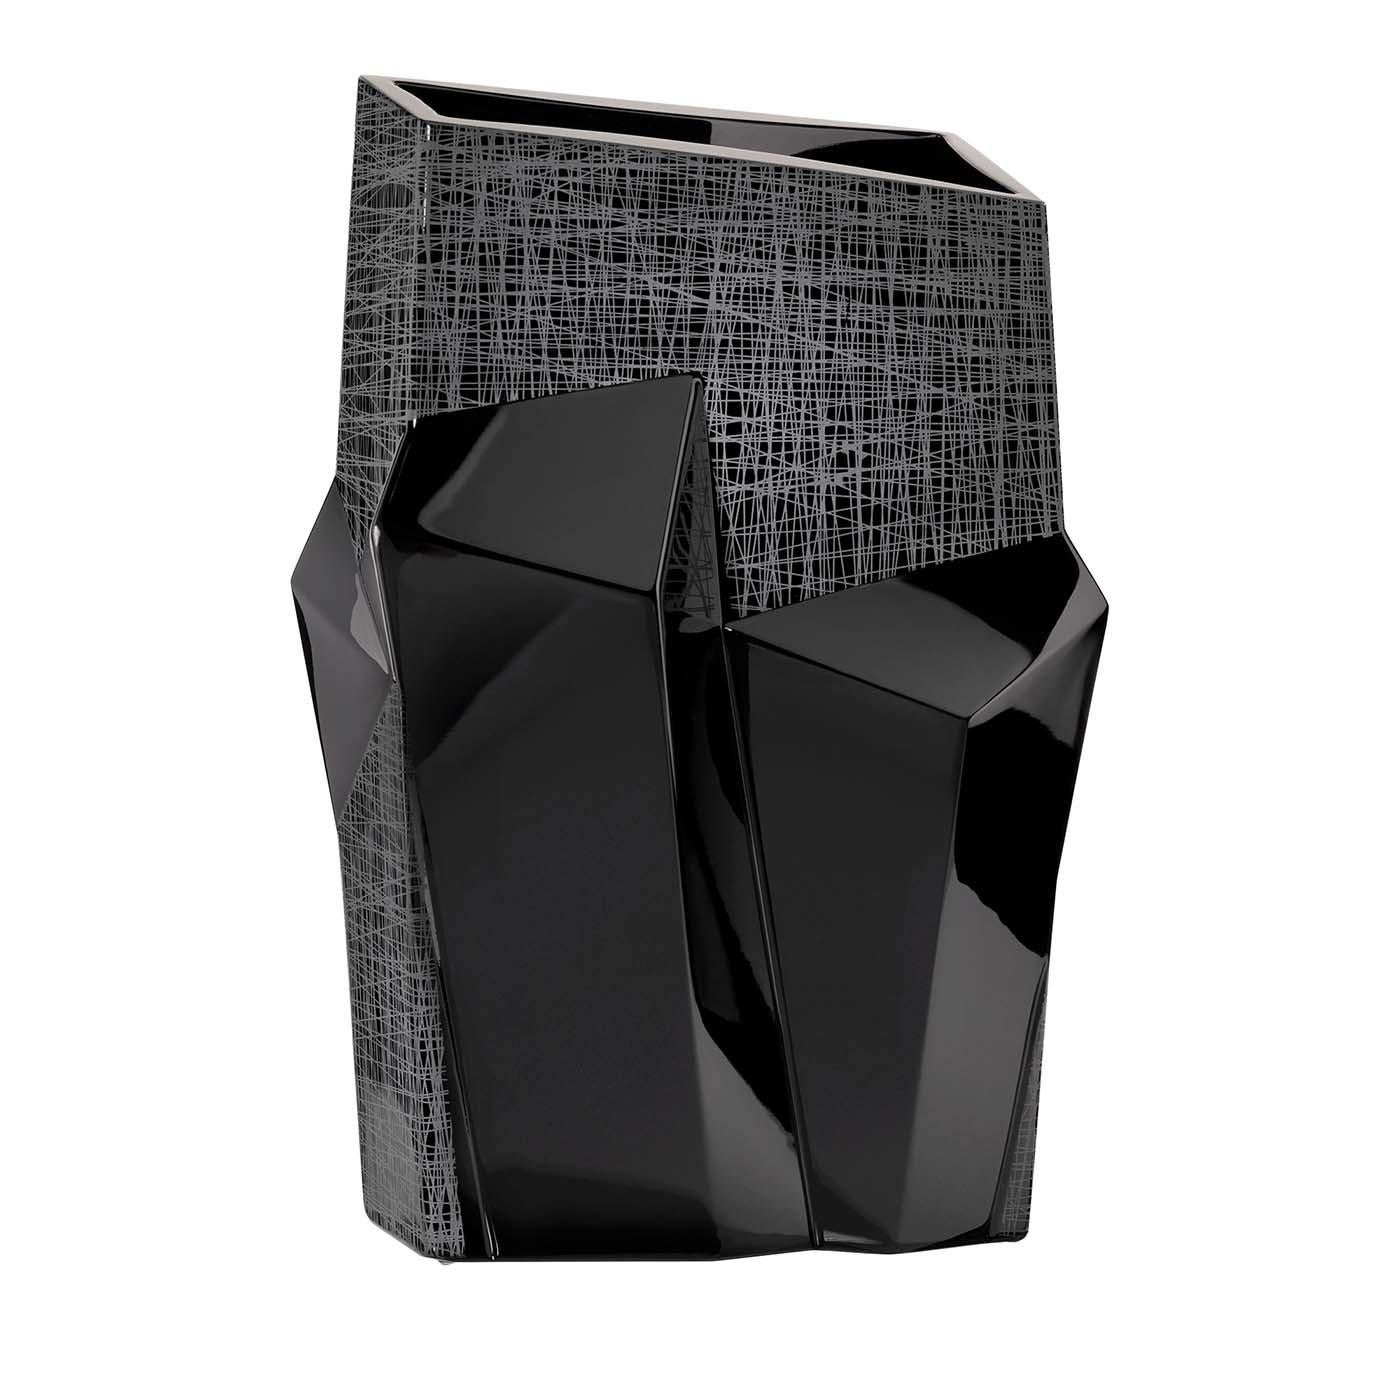 This stunning vase was crafted entirely of black crystal and its unique volumes are a celebration of Expressionist art. Dynamic and intriguing, the asymmetrical lines of this silhouette seem to have been pushed forward by an inner force with